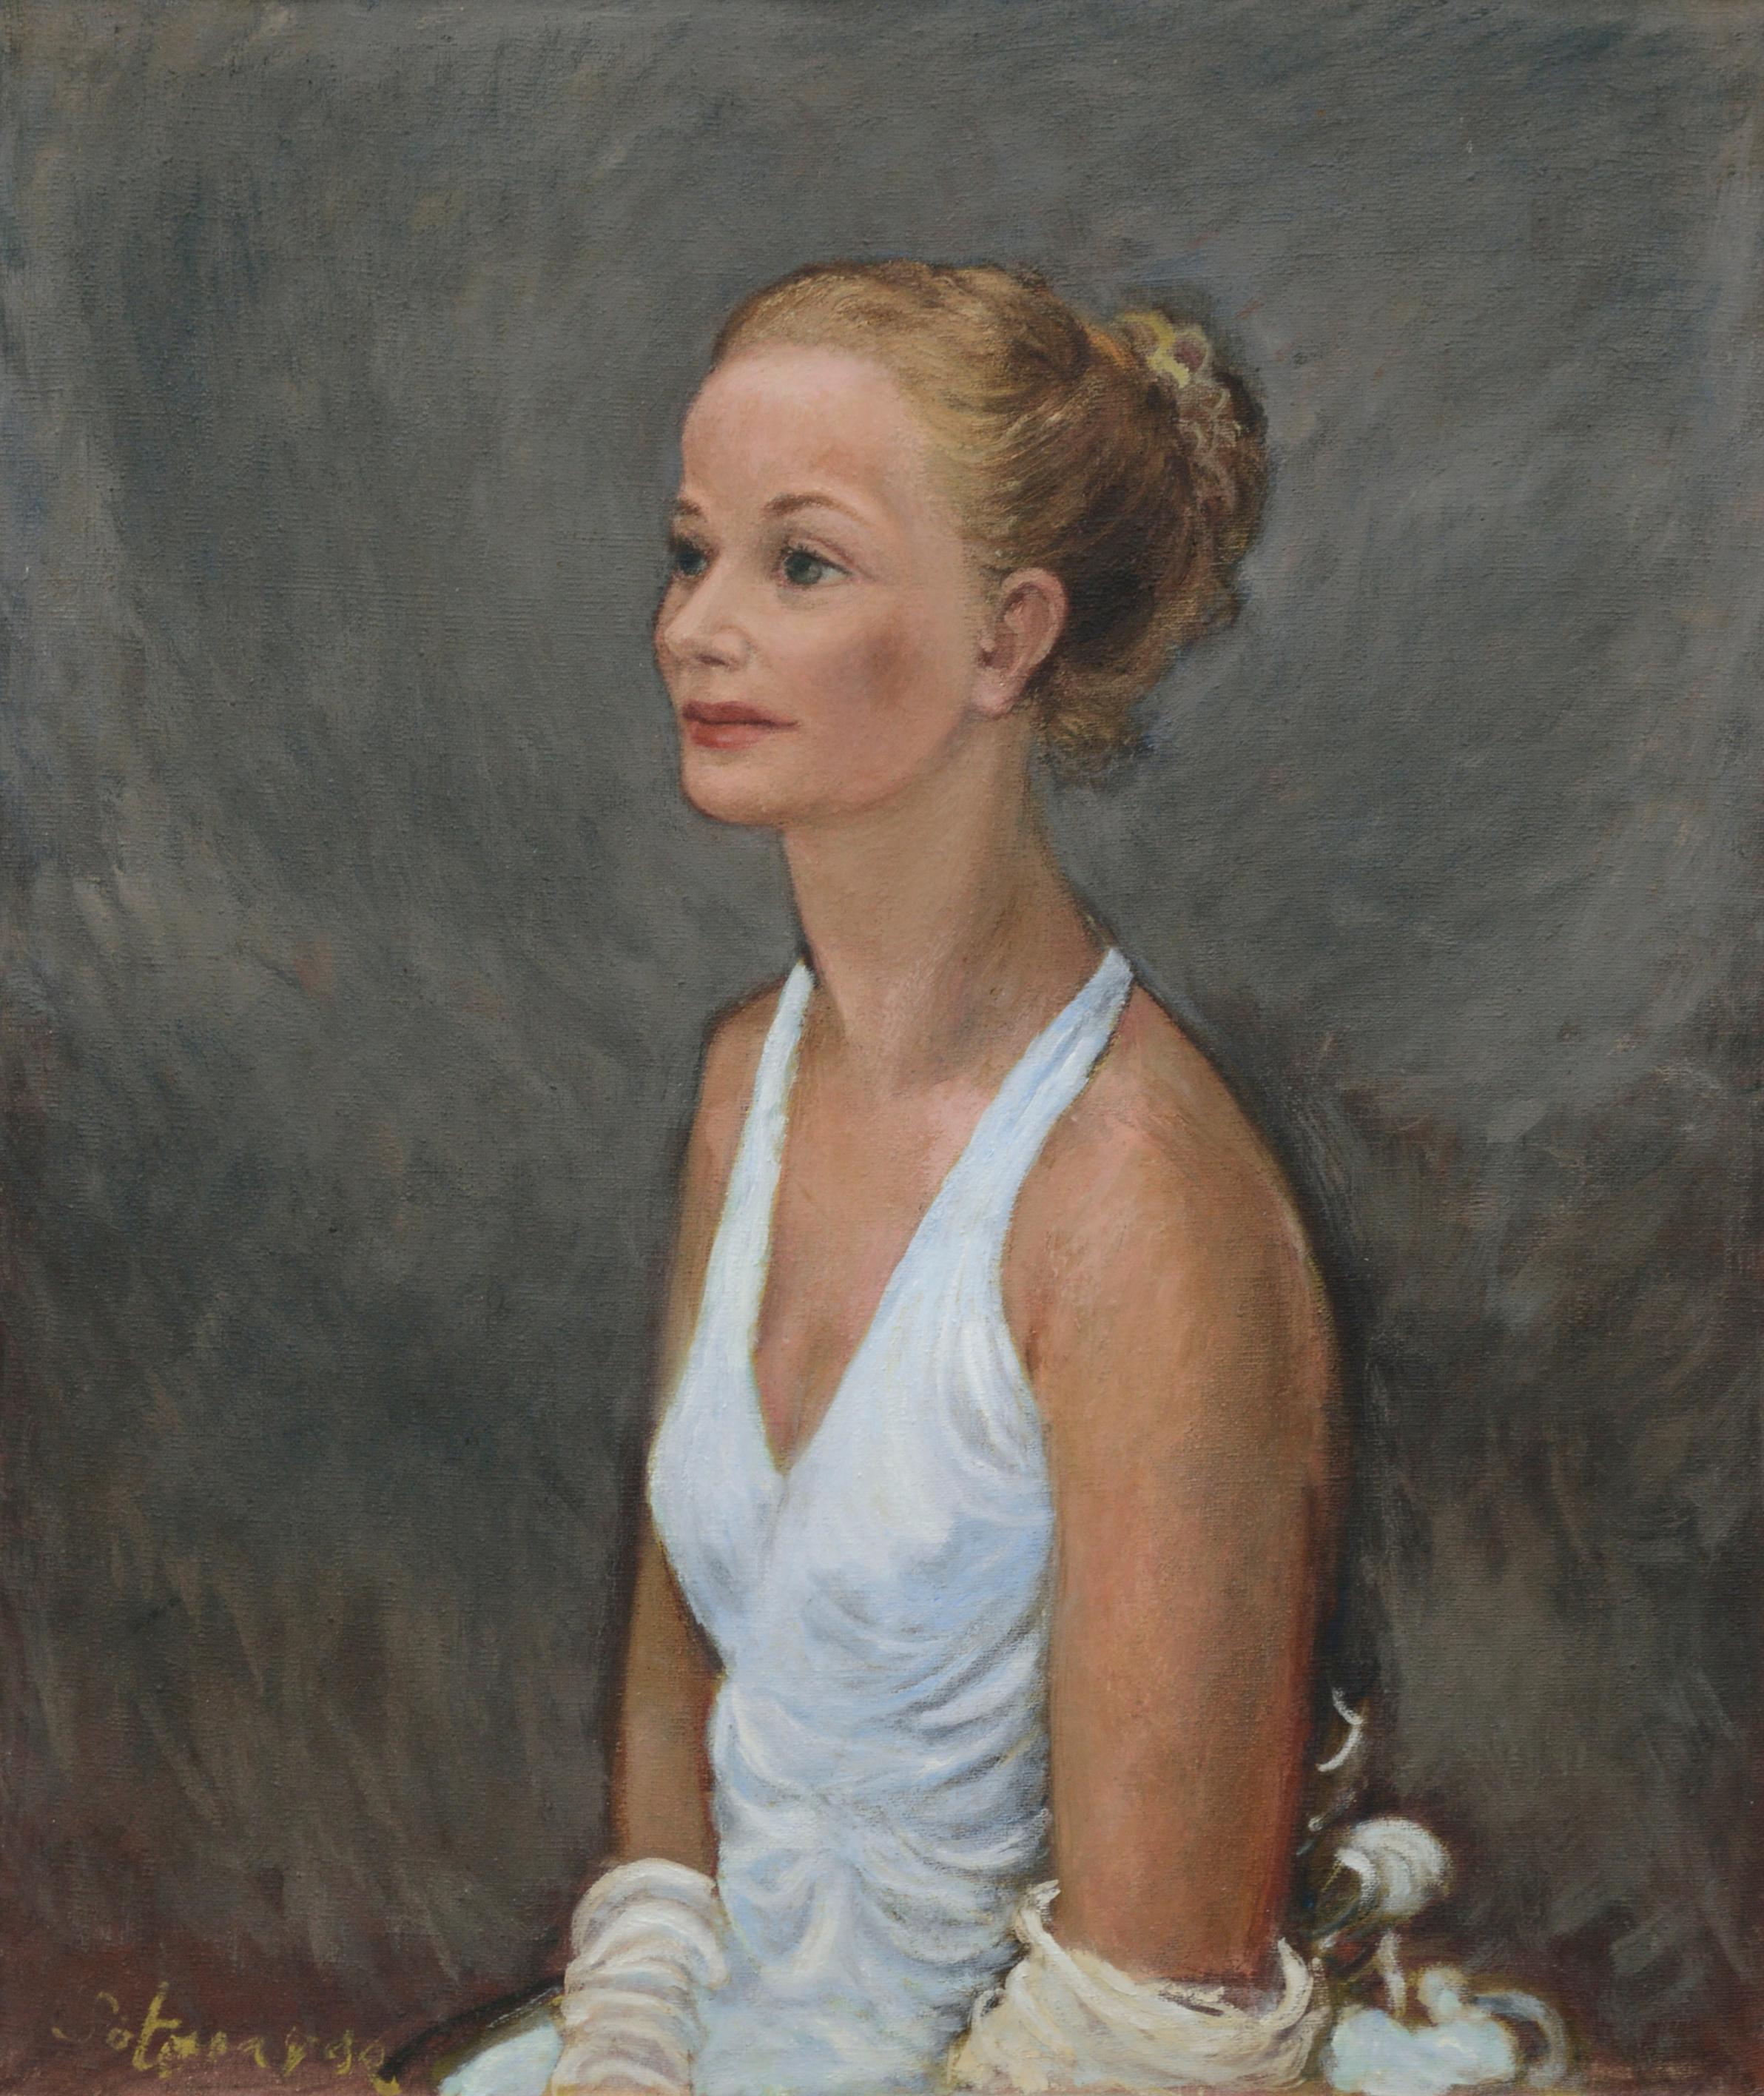 Portrait of a Woman in White Dress - Painting by Antonio Sotomayor